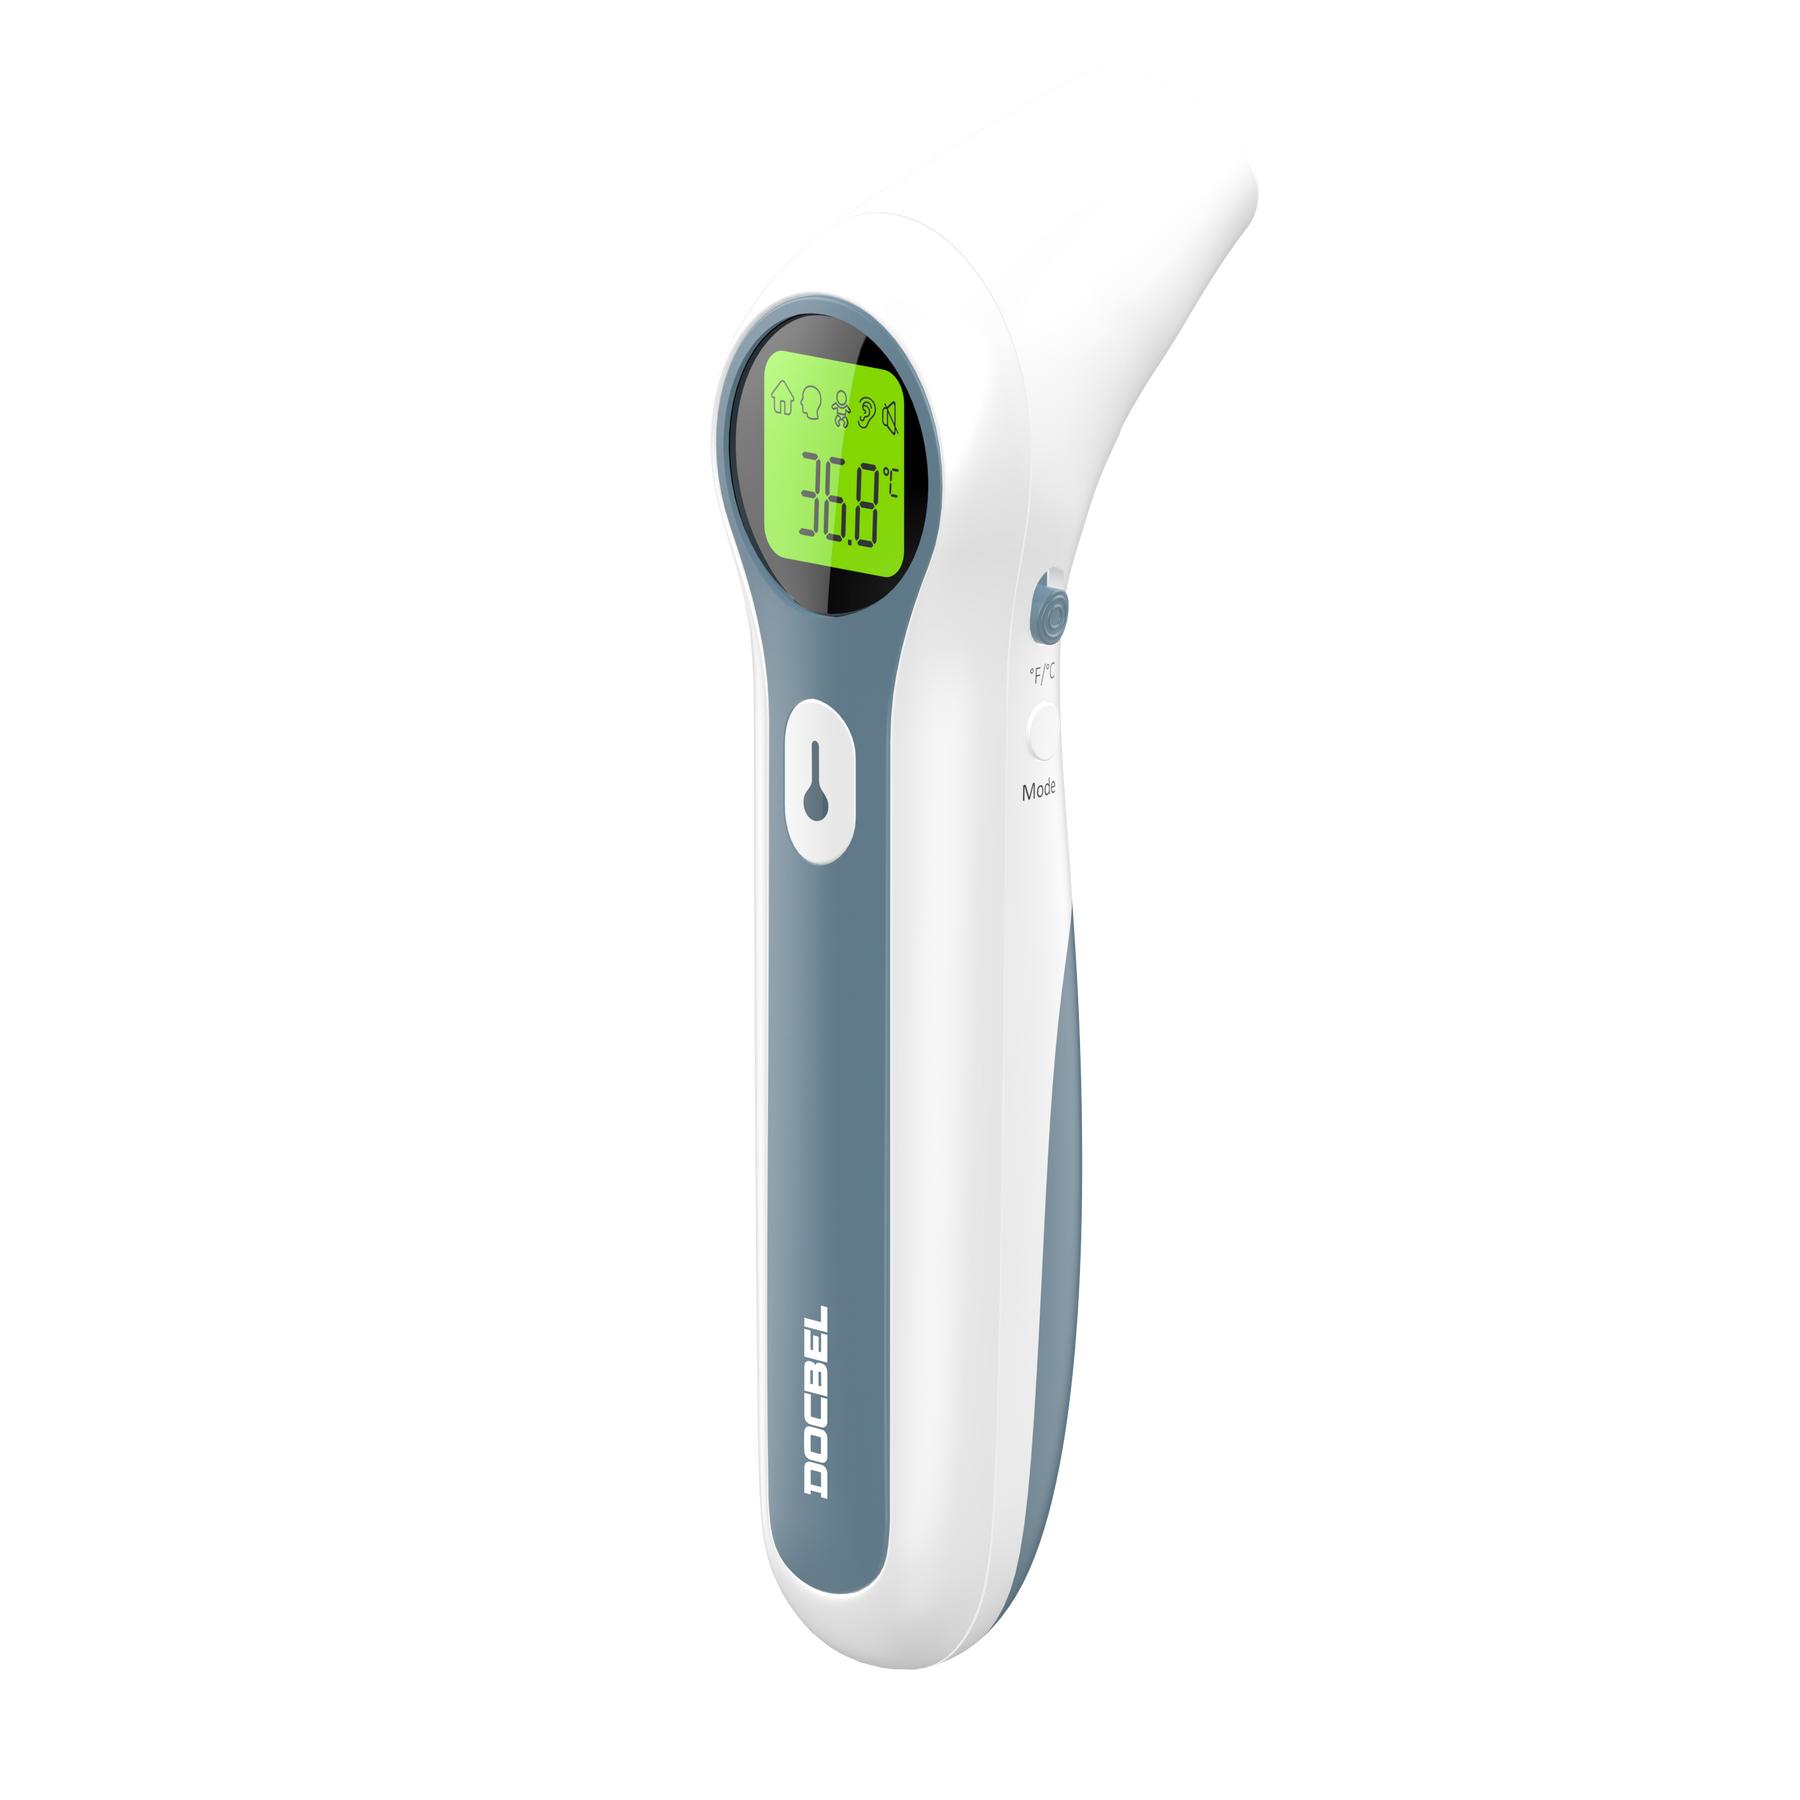 Docbel TH 300 Non Contact Digital Infrared Thermometer